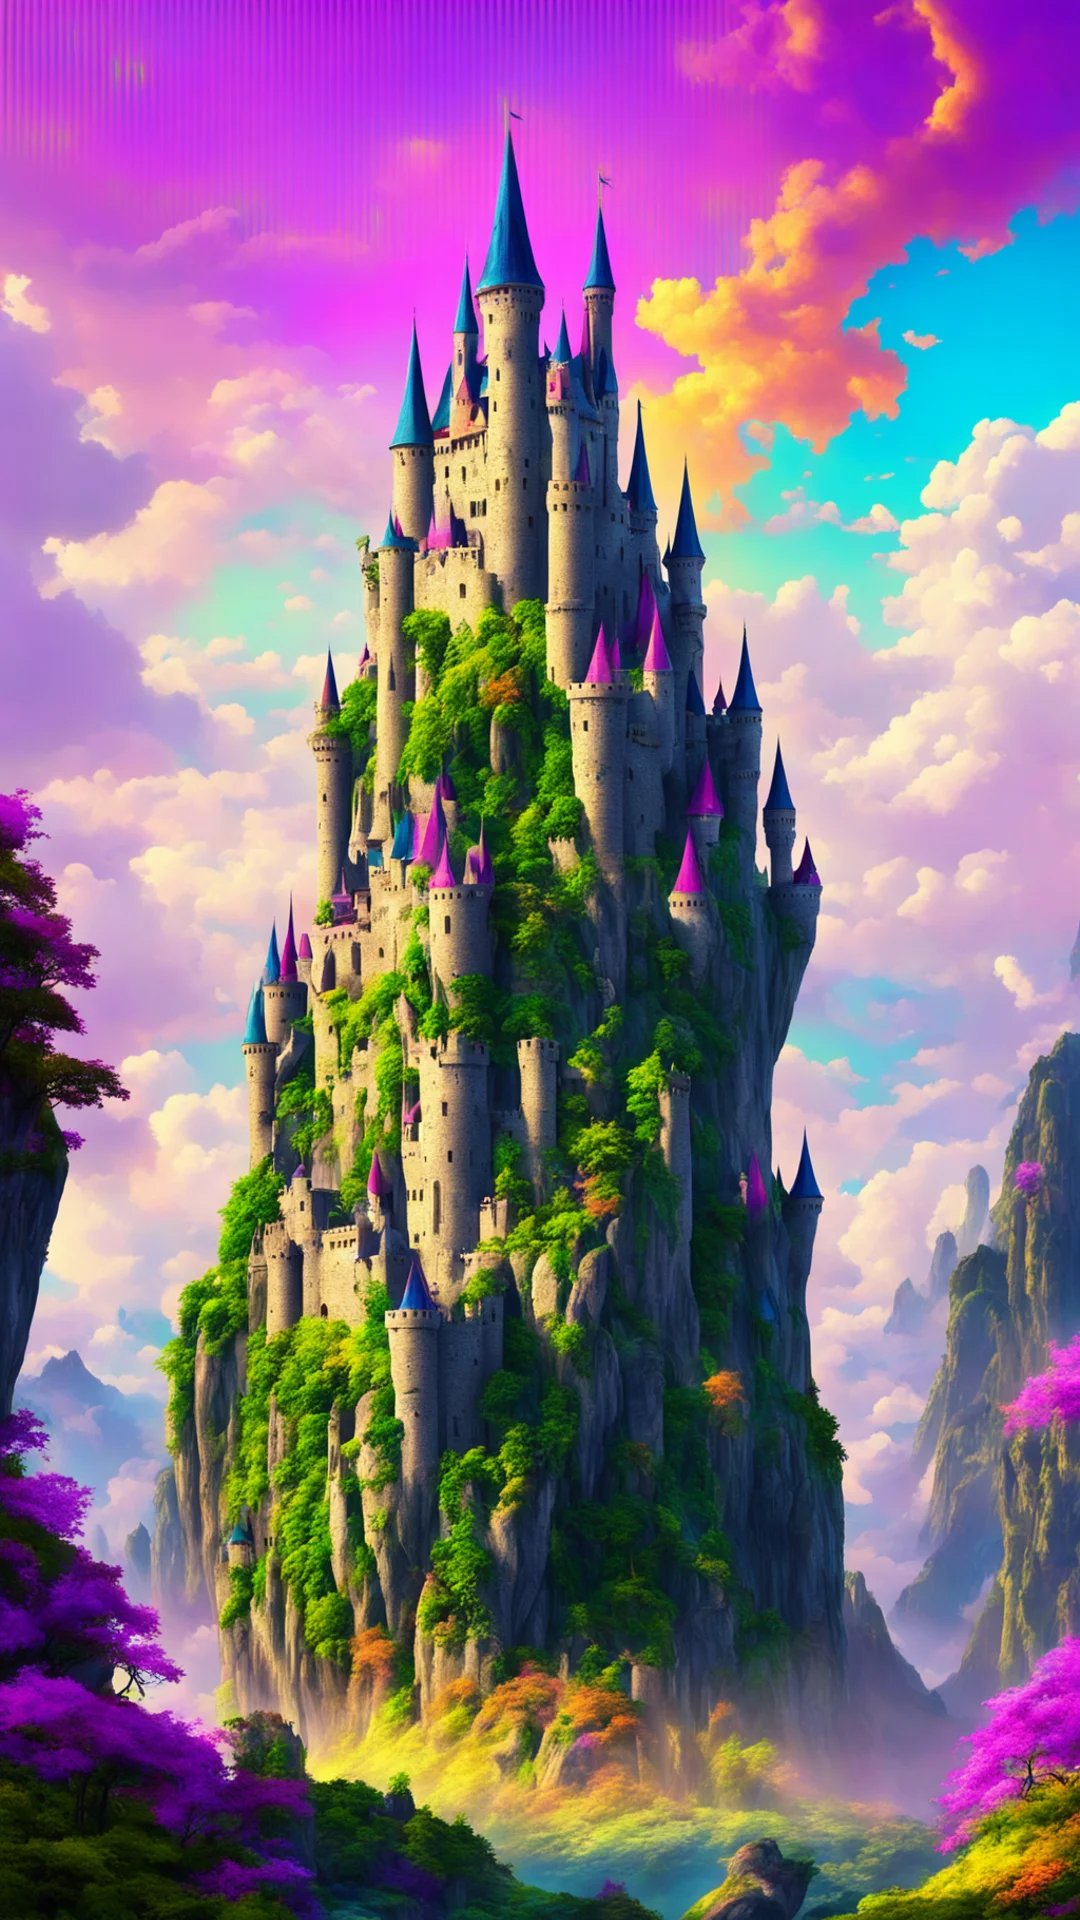 castle epic standing tall colorful world fantasy amazing awesome portrait 2 tall